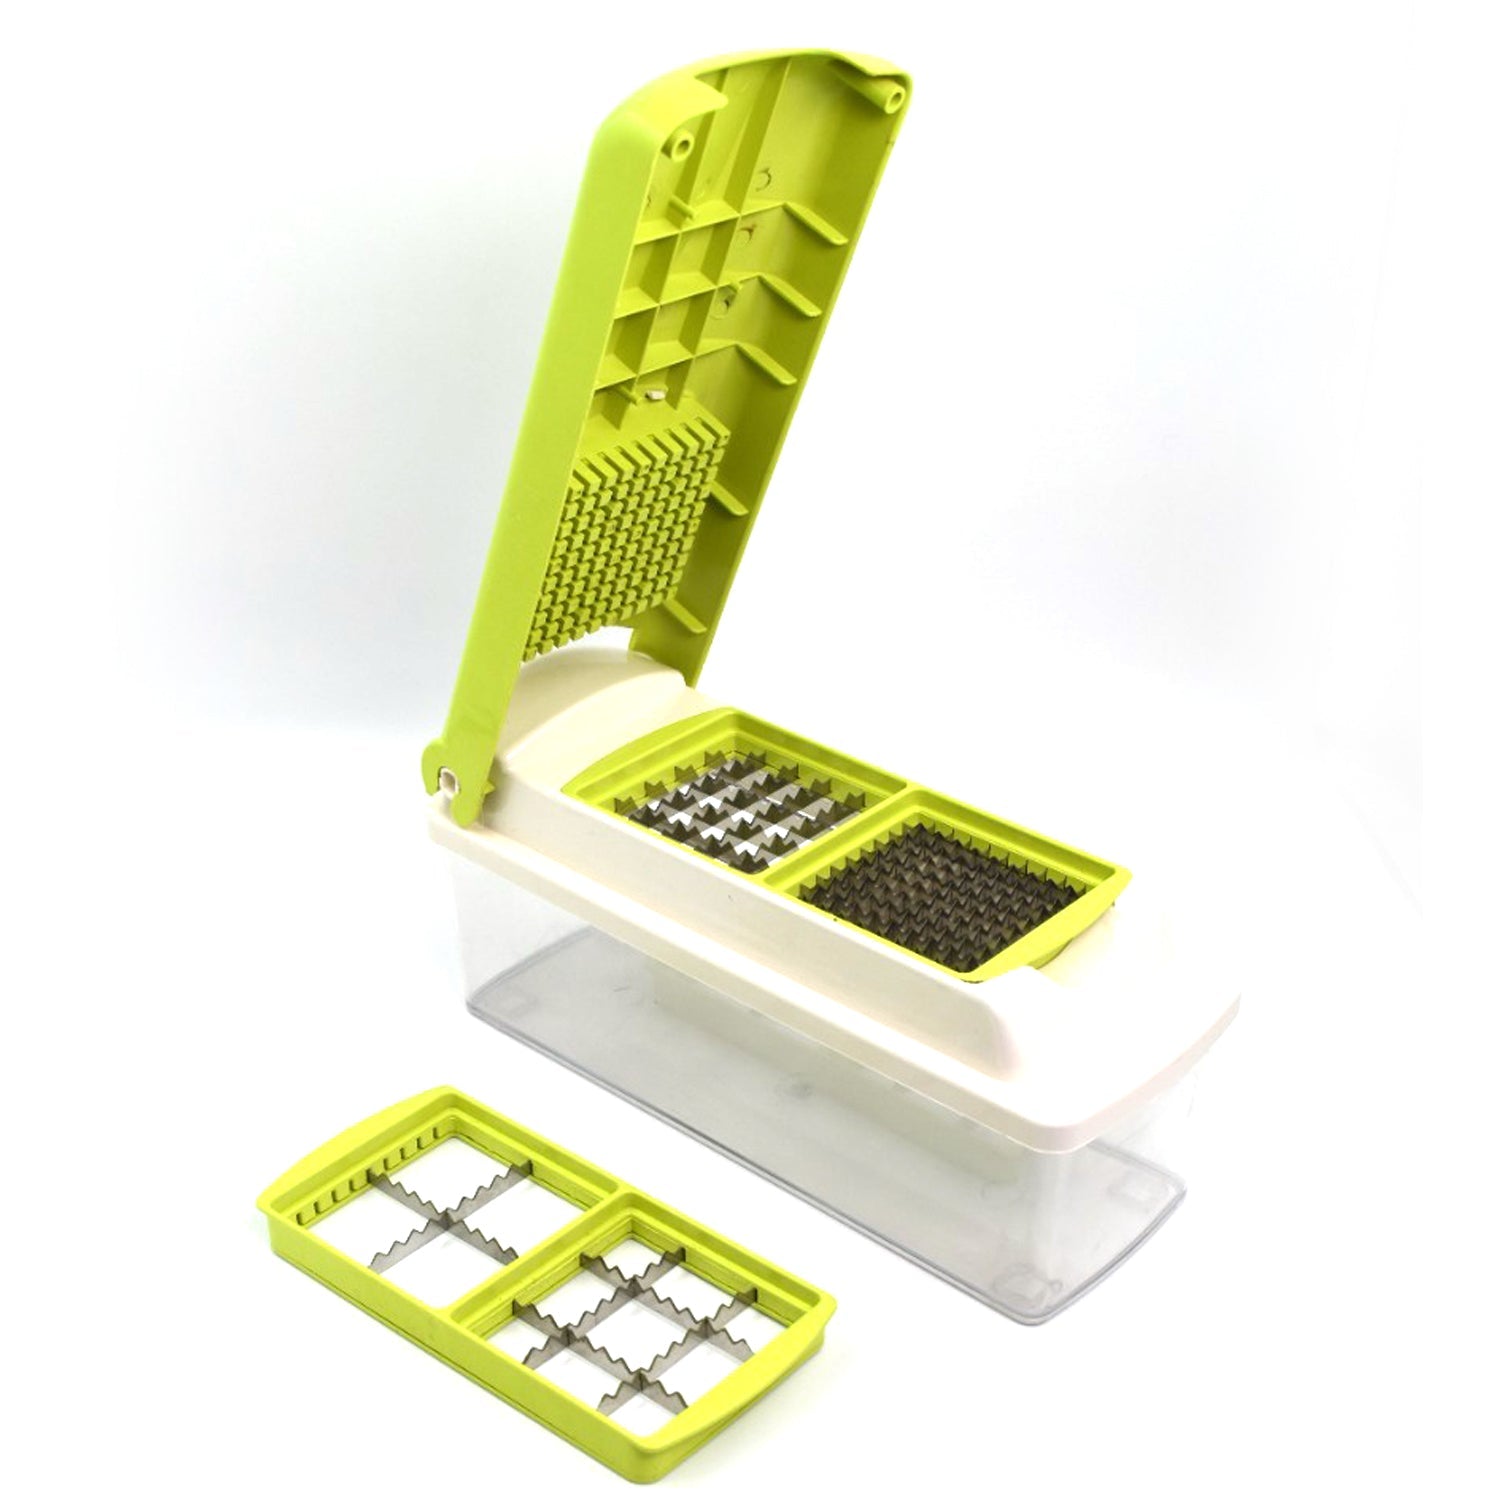 2387 Nicer Dicer 12 in 1 Used For Chopping And Cutting Of Vegetables And Fruits.